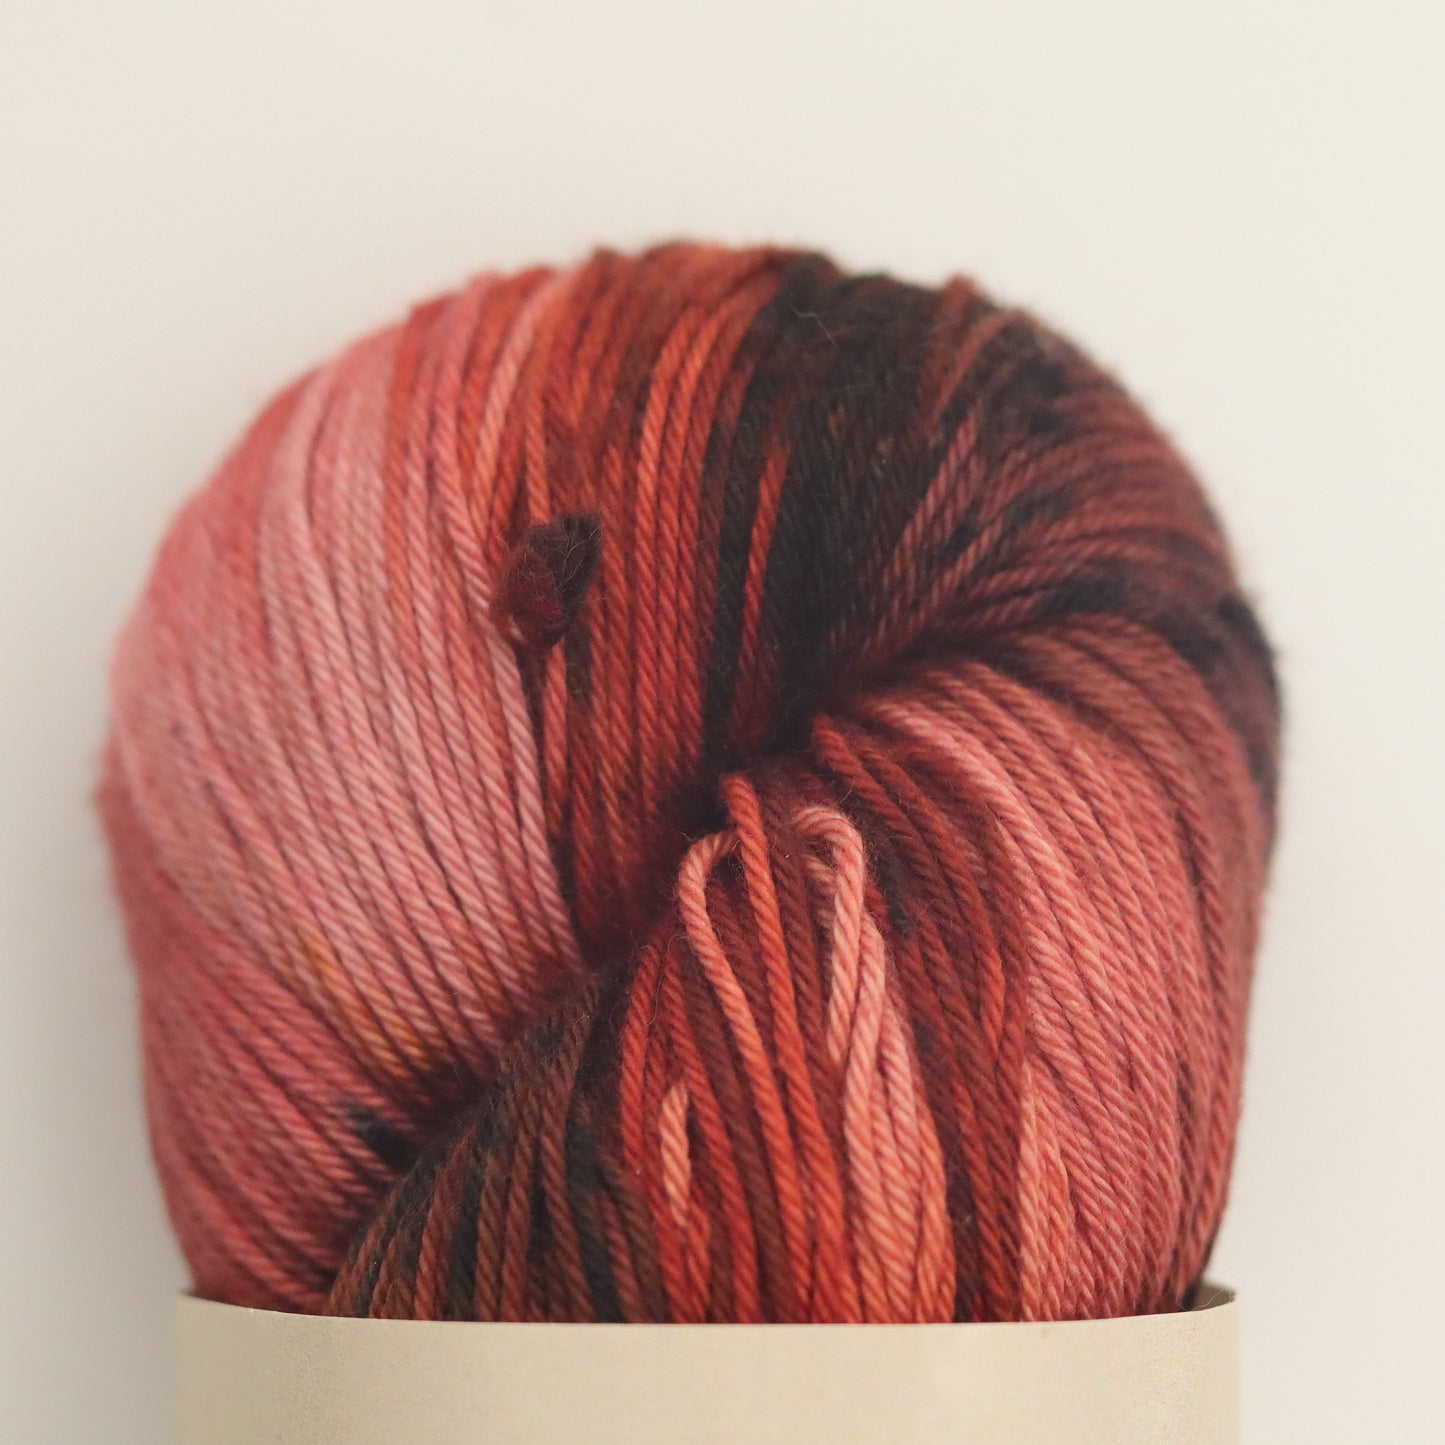 Peacock Yarn Sport Cotton | Assorted Reds | Hand Dyed 100% Cotton Yarn